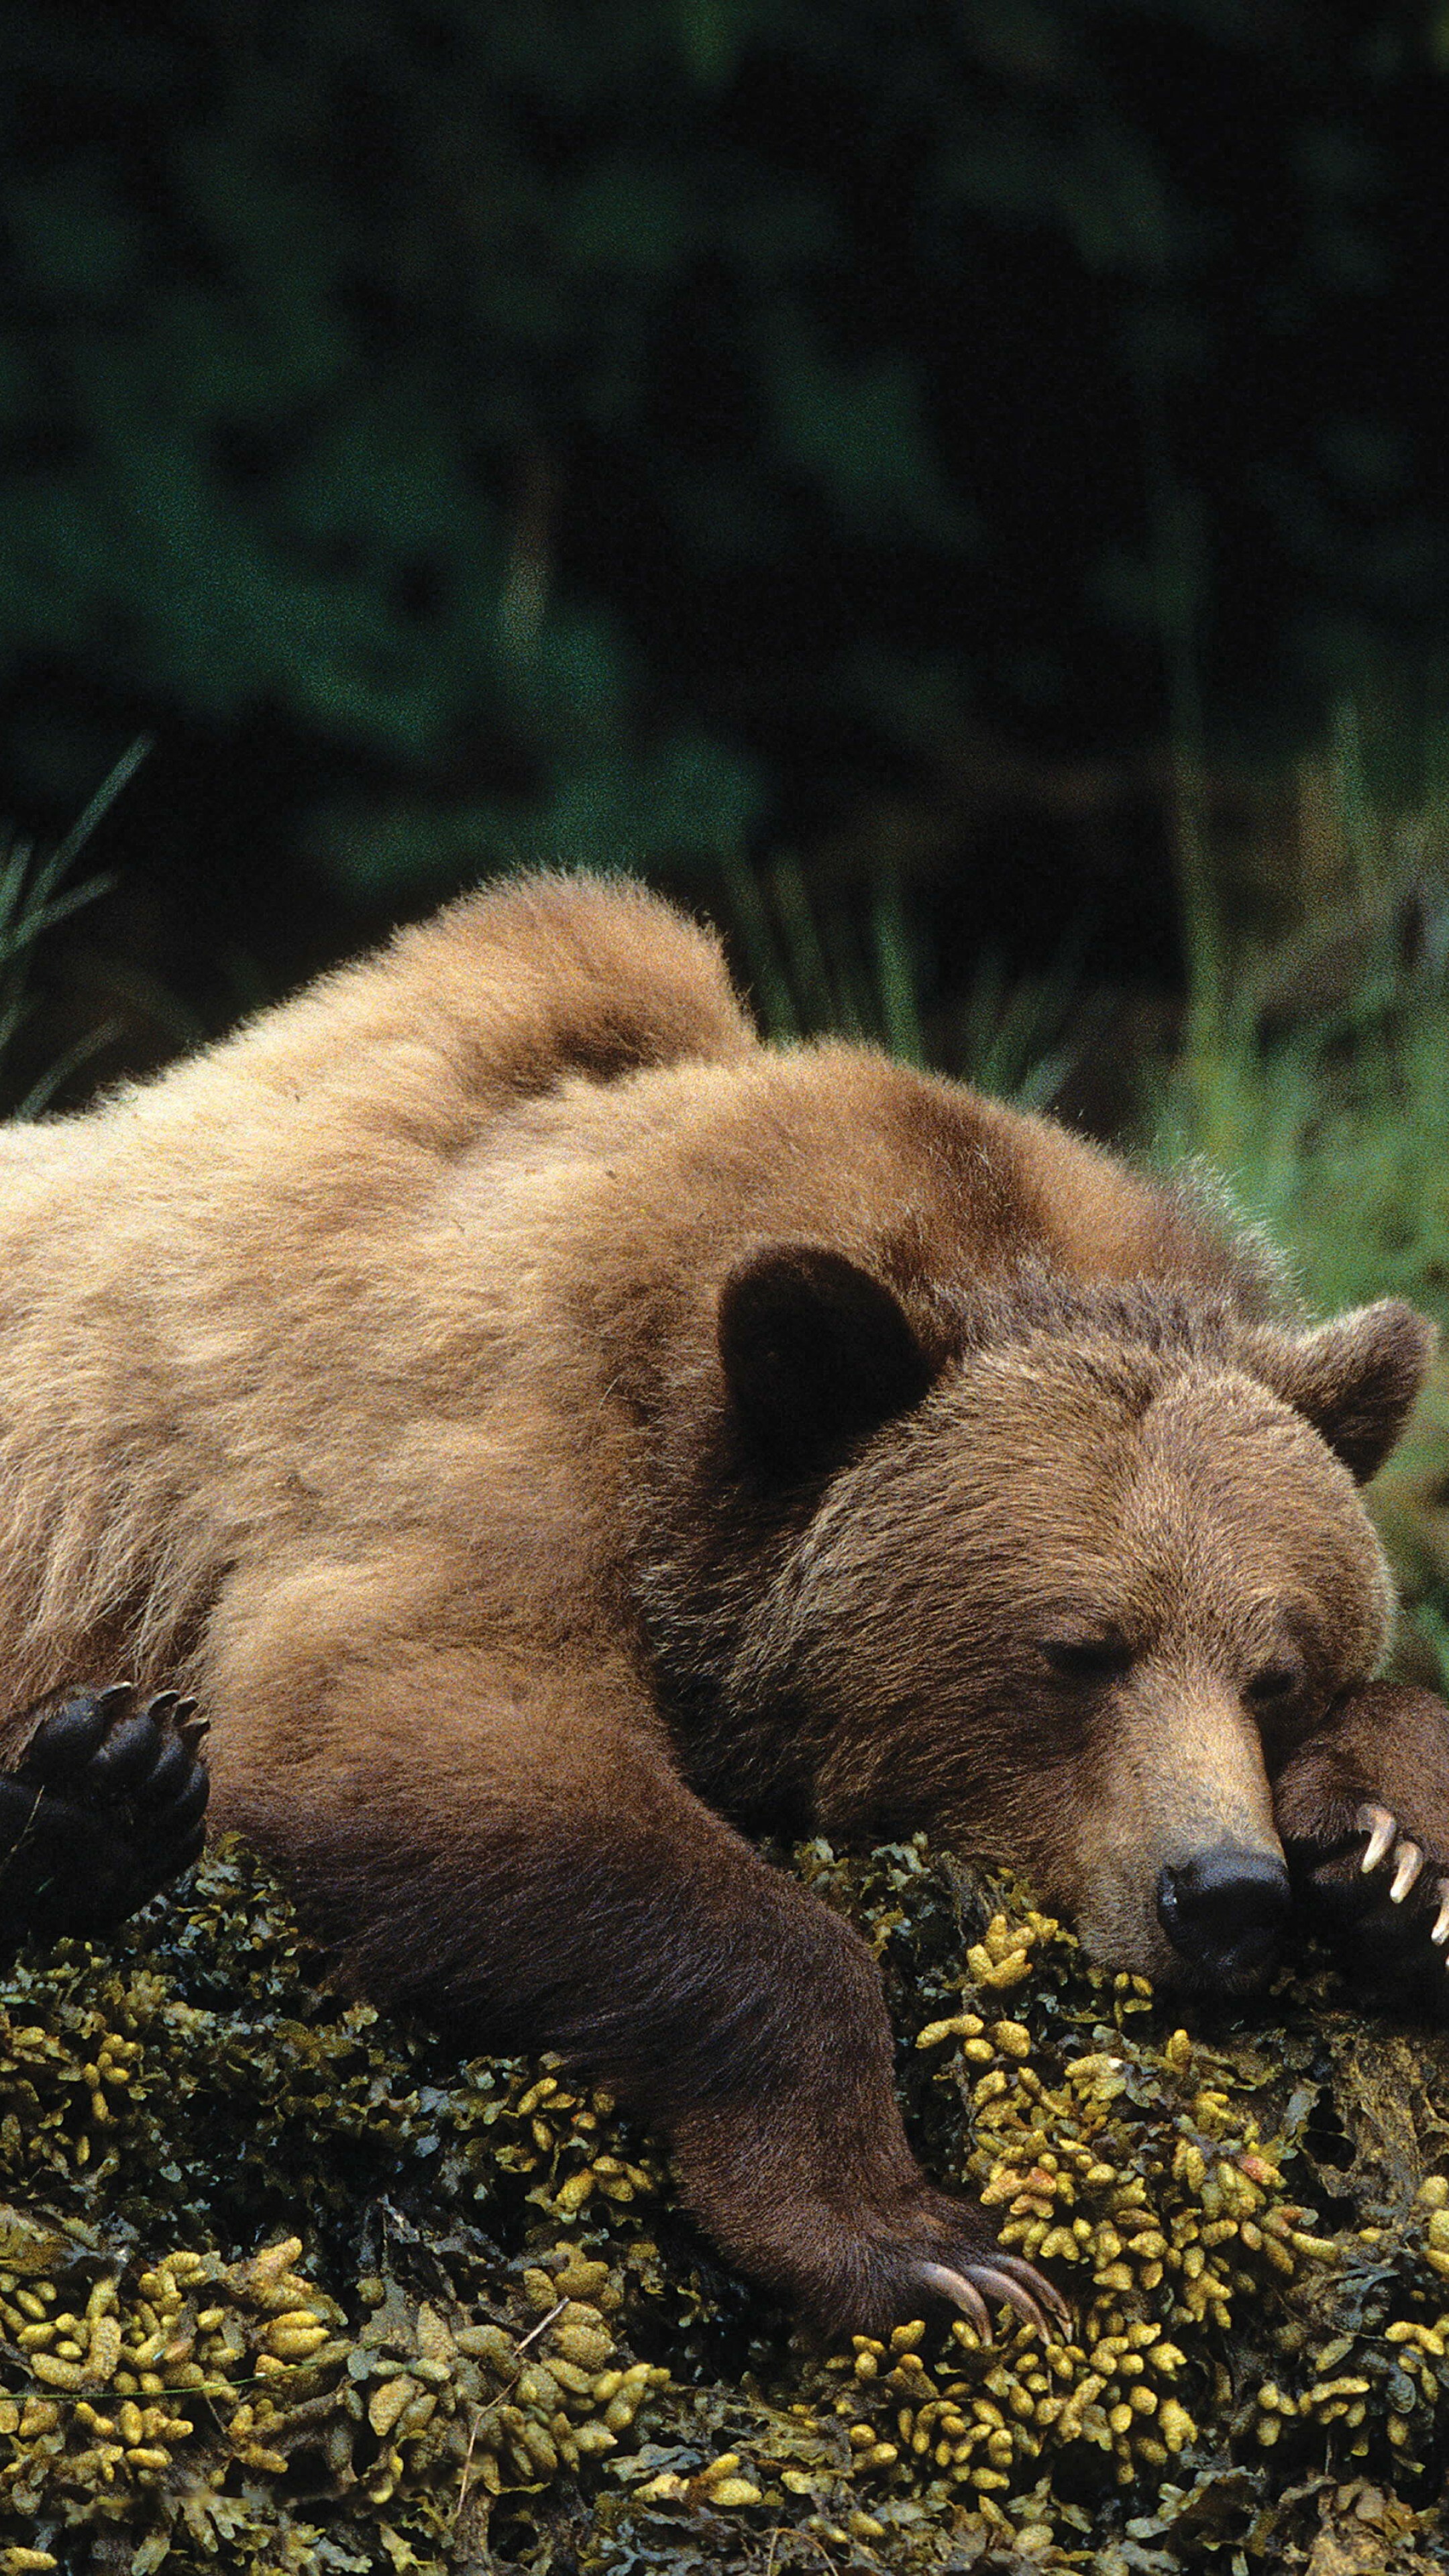 Bear: Mammal, Have been hunted since prehistoric times for their meat and fur. 2160x3840 4K Background.